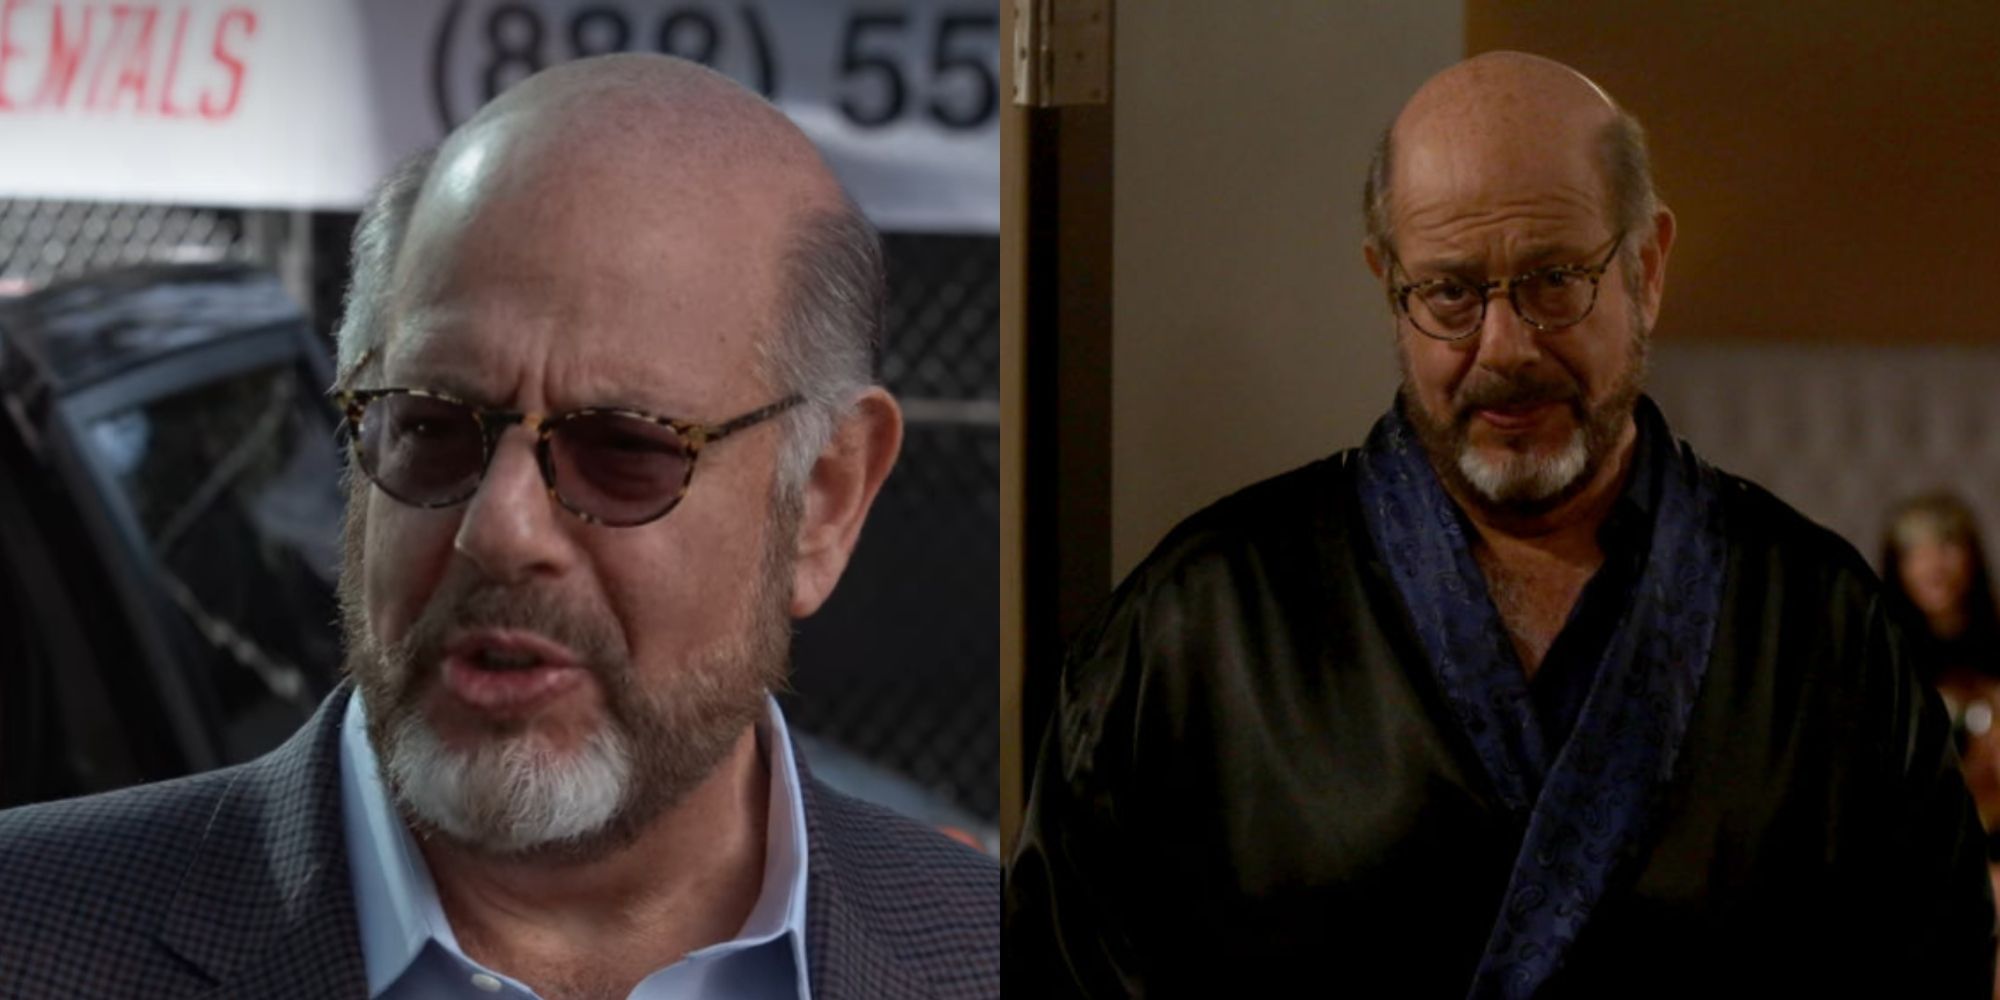 Fred Melamed plays J. Cronkite Valley-Forge in New Girl and D.C. Parlov in Brooklyn 99